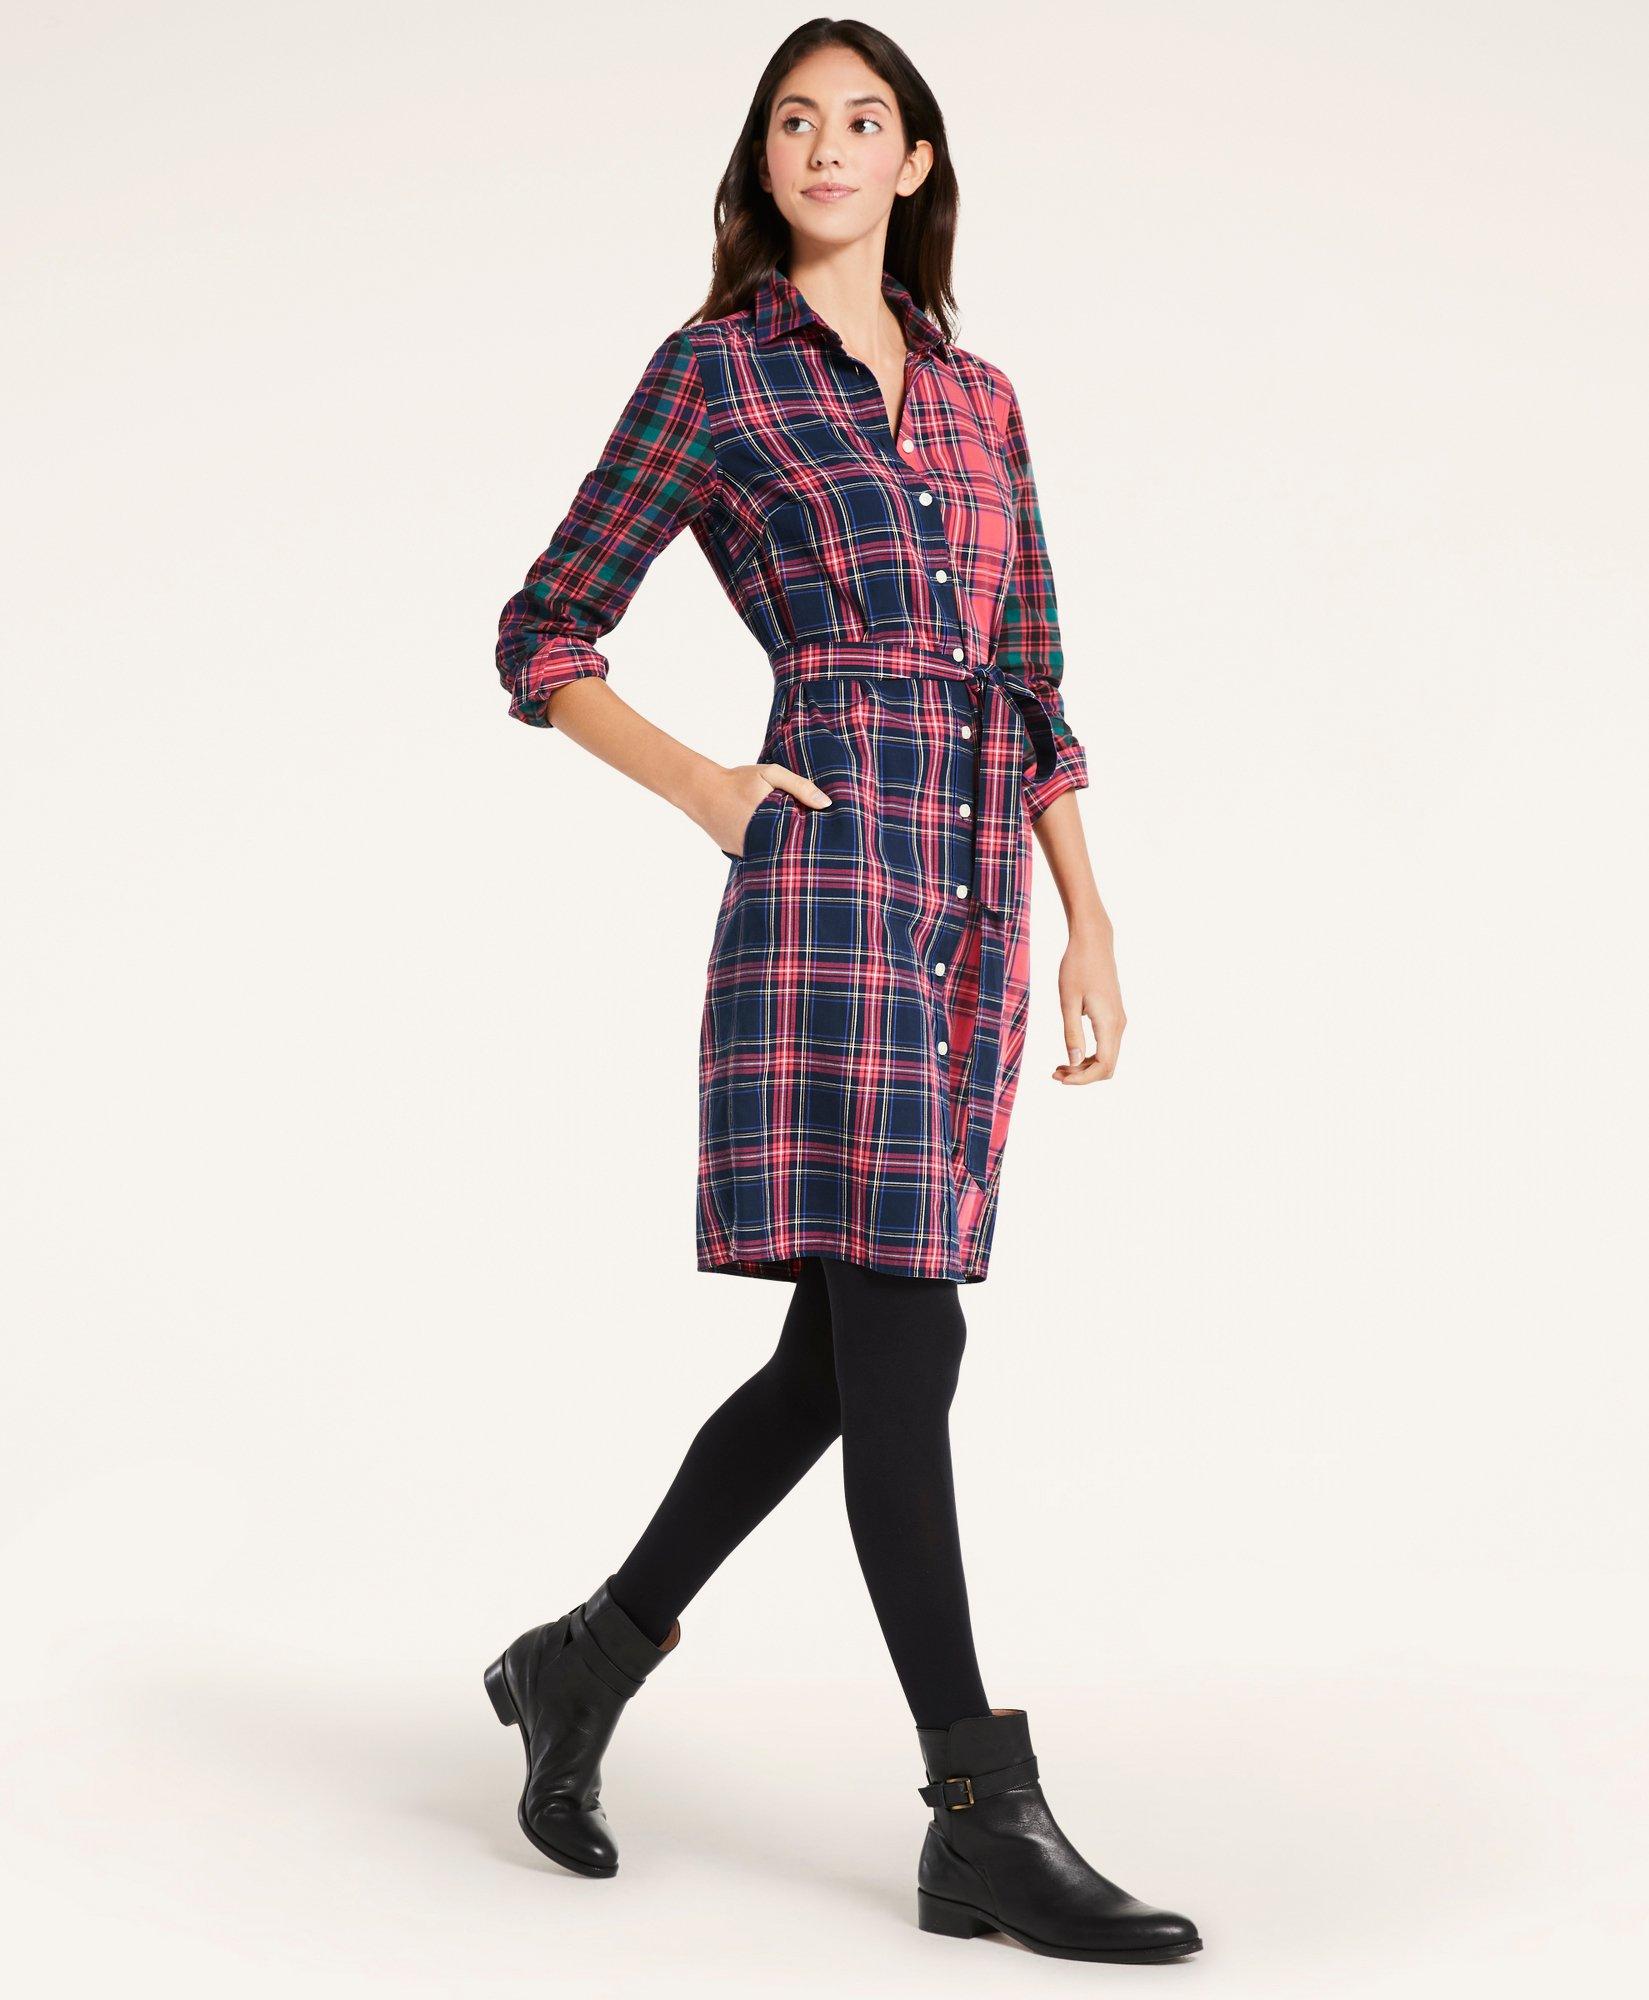 Brooks Brothers Women's Classic Fit Flannel Shirt